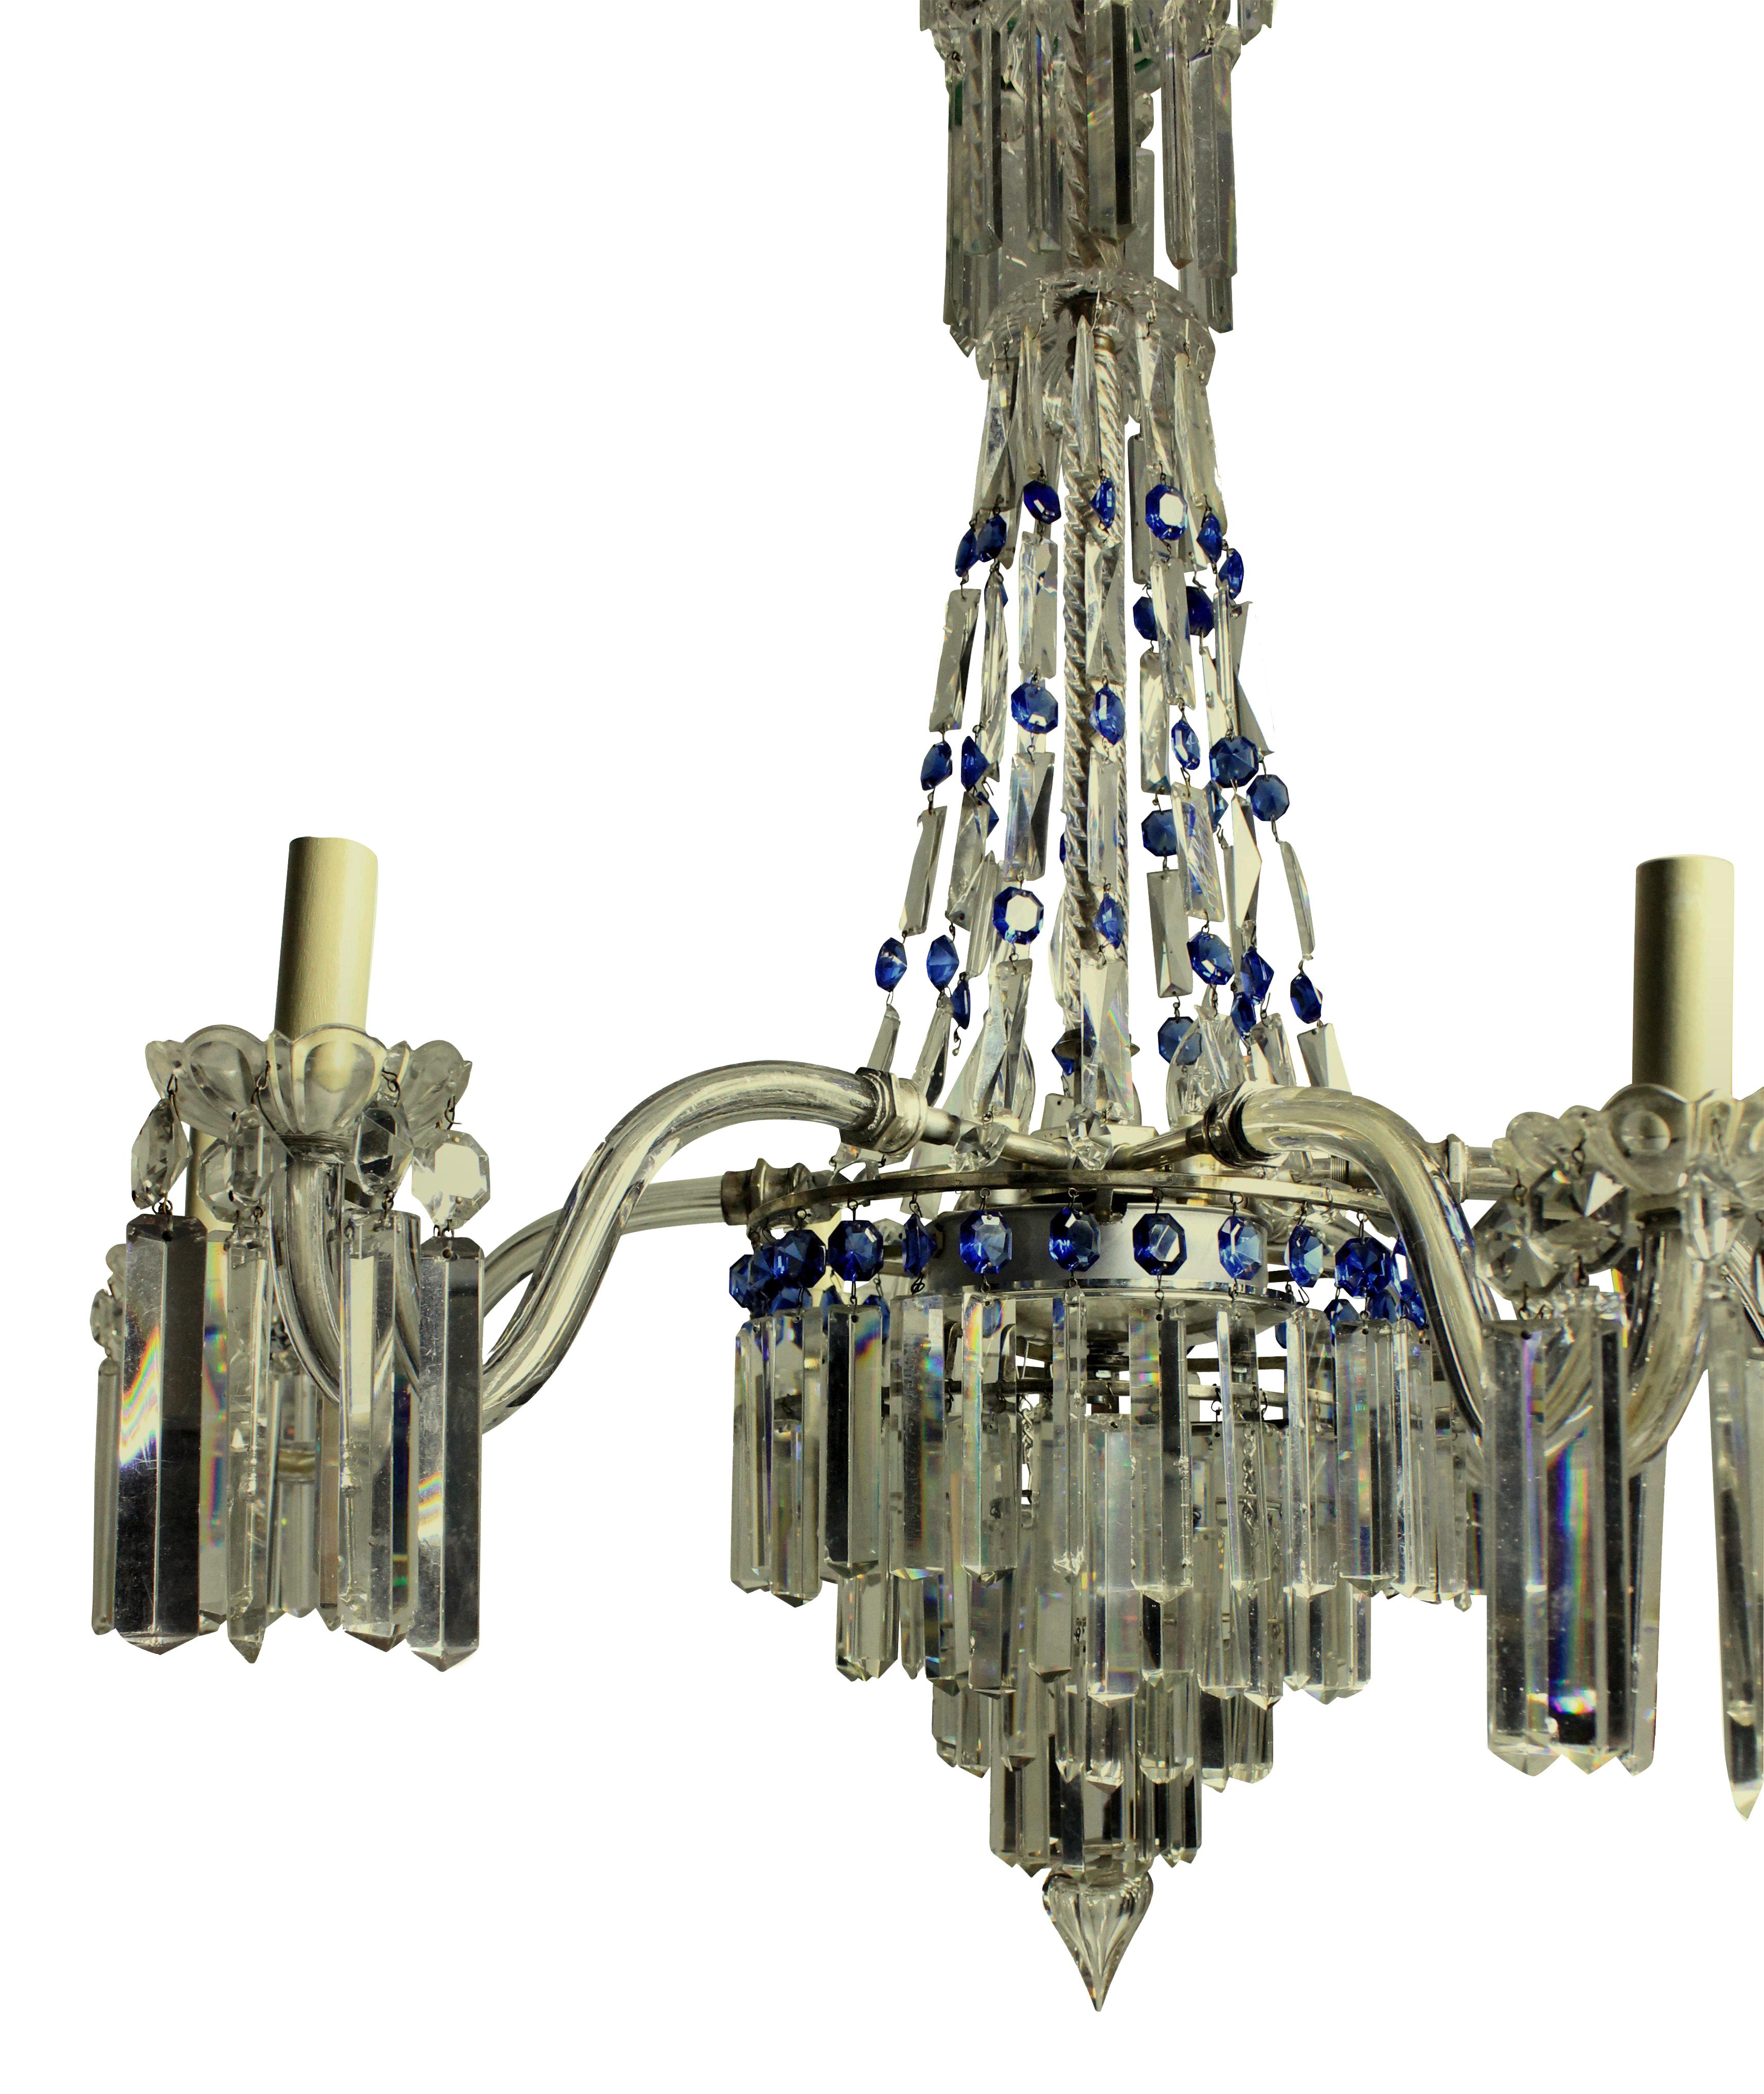 A fine English cut-glass tent and waterfall chandelier with blue glass detailing. Formerly a gasolier.